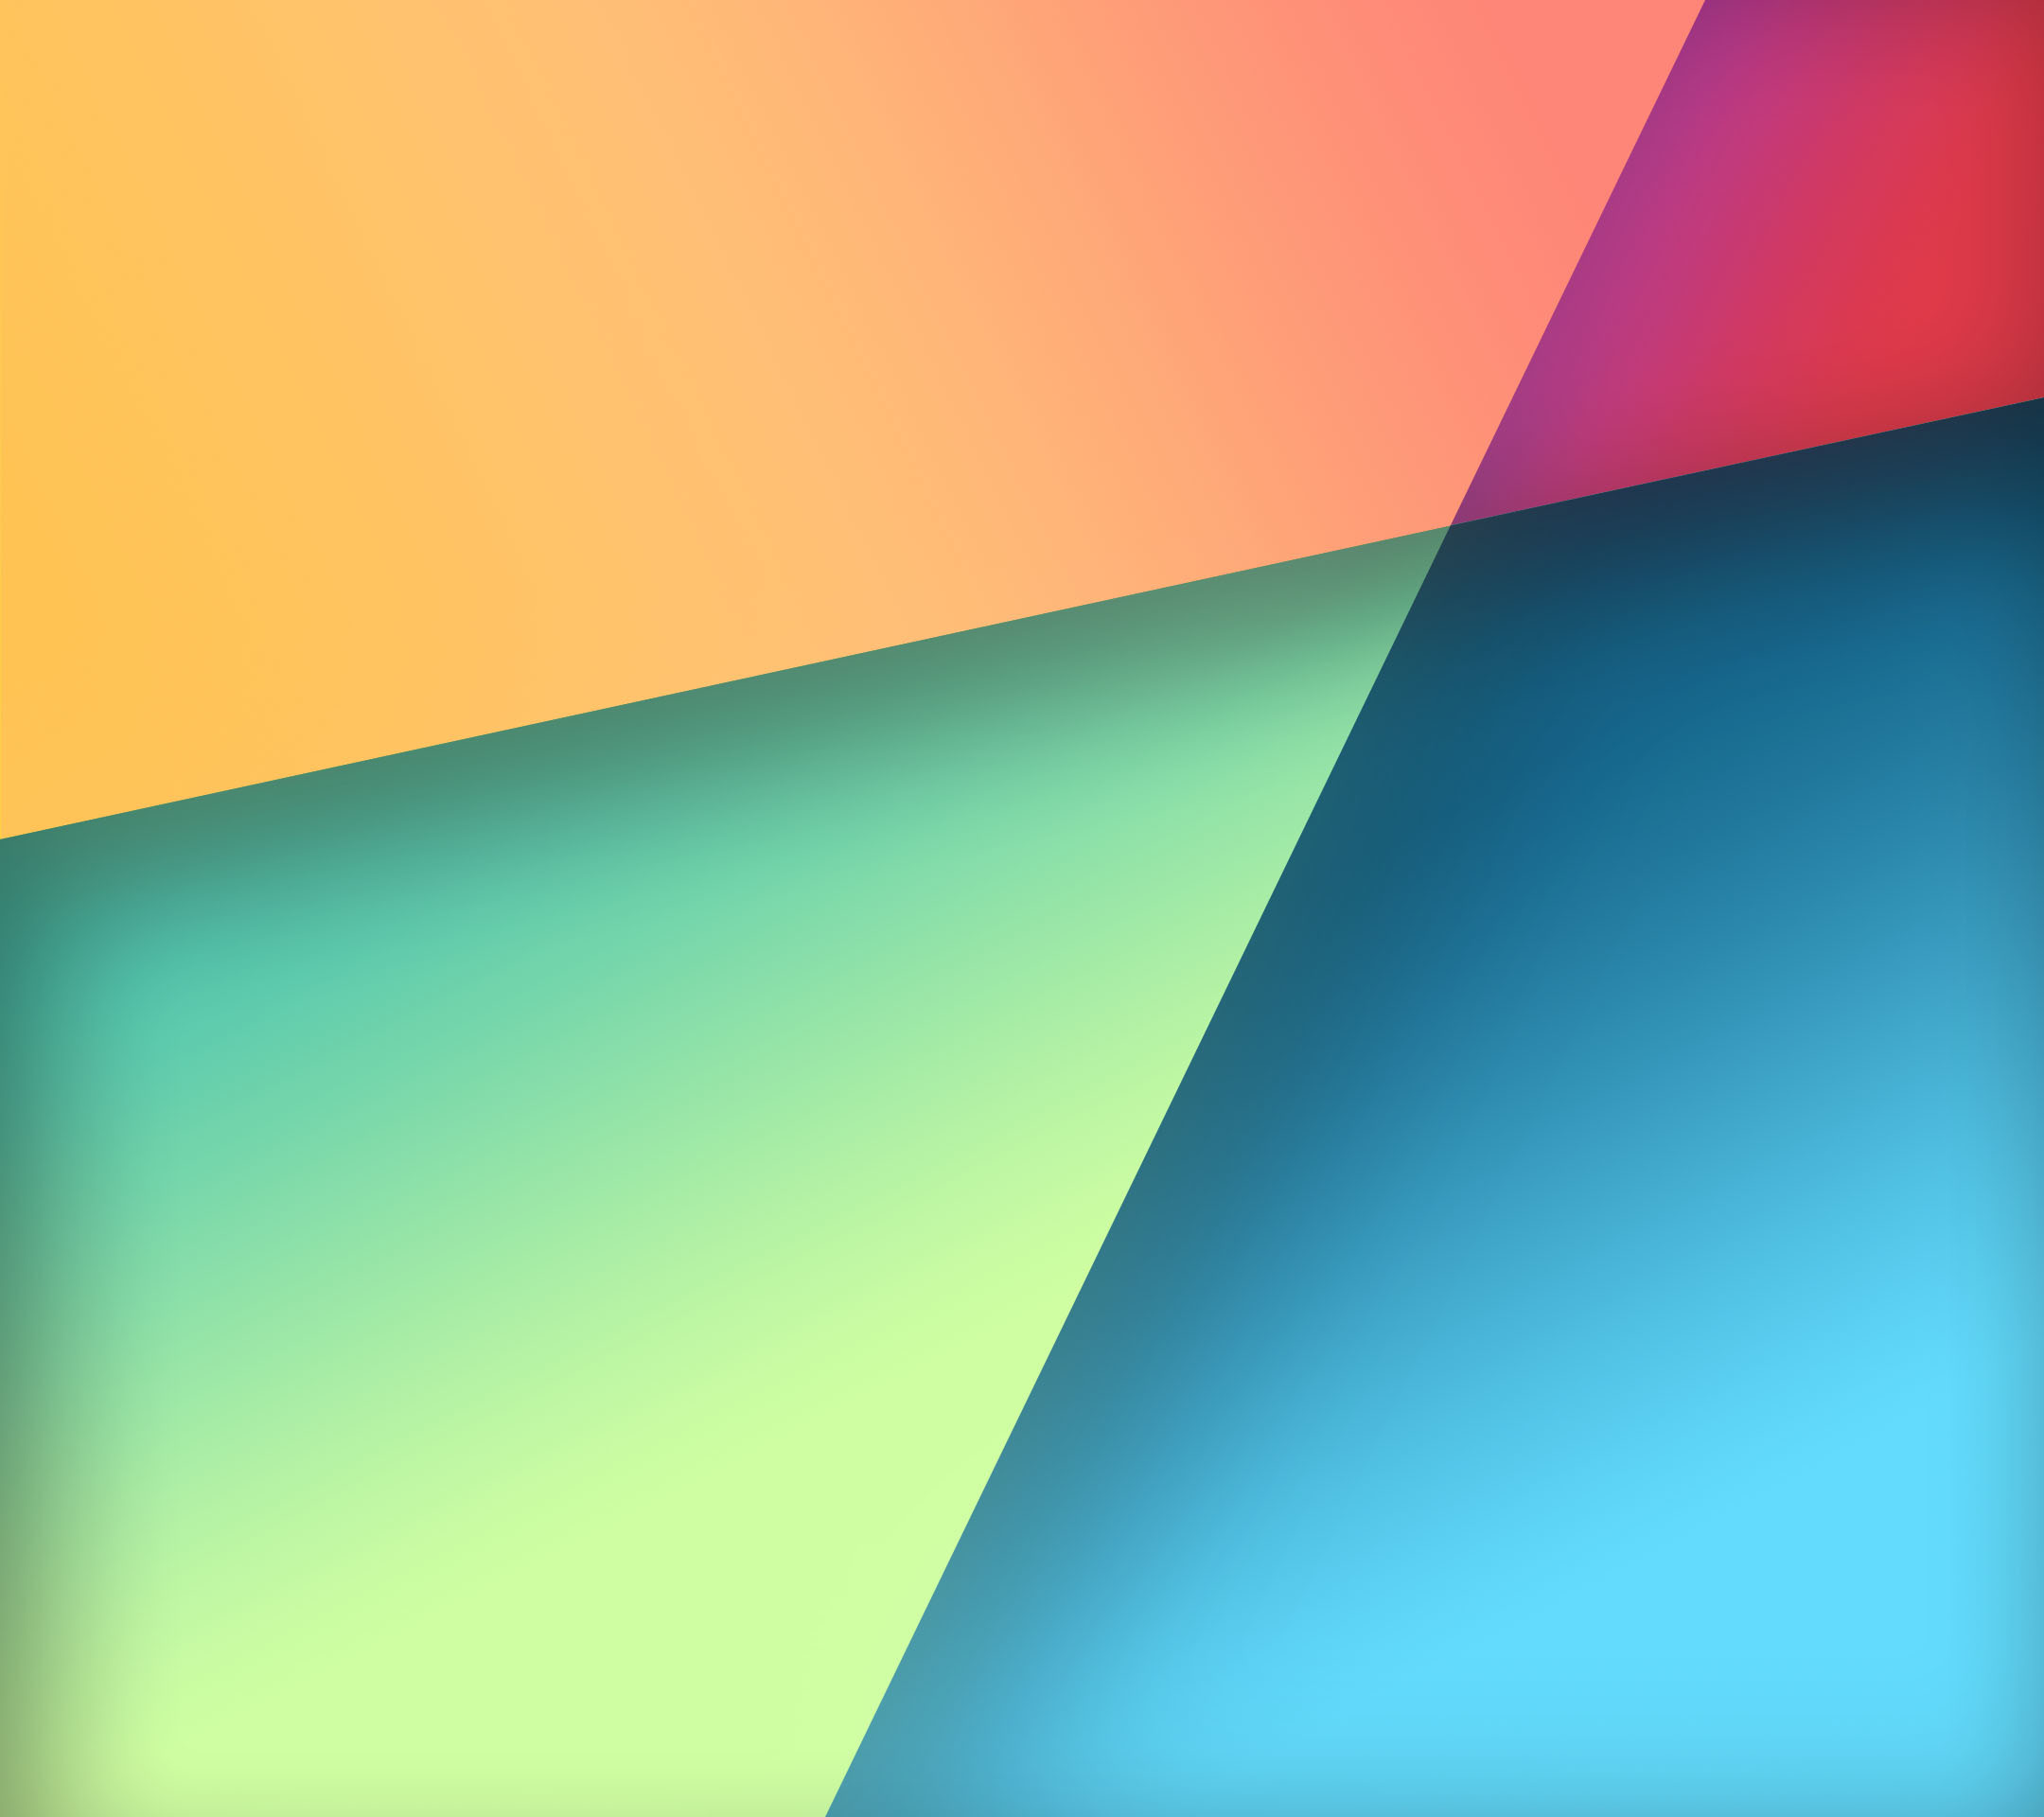 Nexus 7 Stock Wallpaper In Google Play Colors By R3conn3r - Google Play Wallpaper Phone - HD Wallpaper 